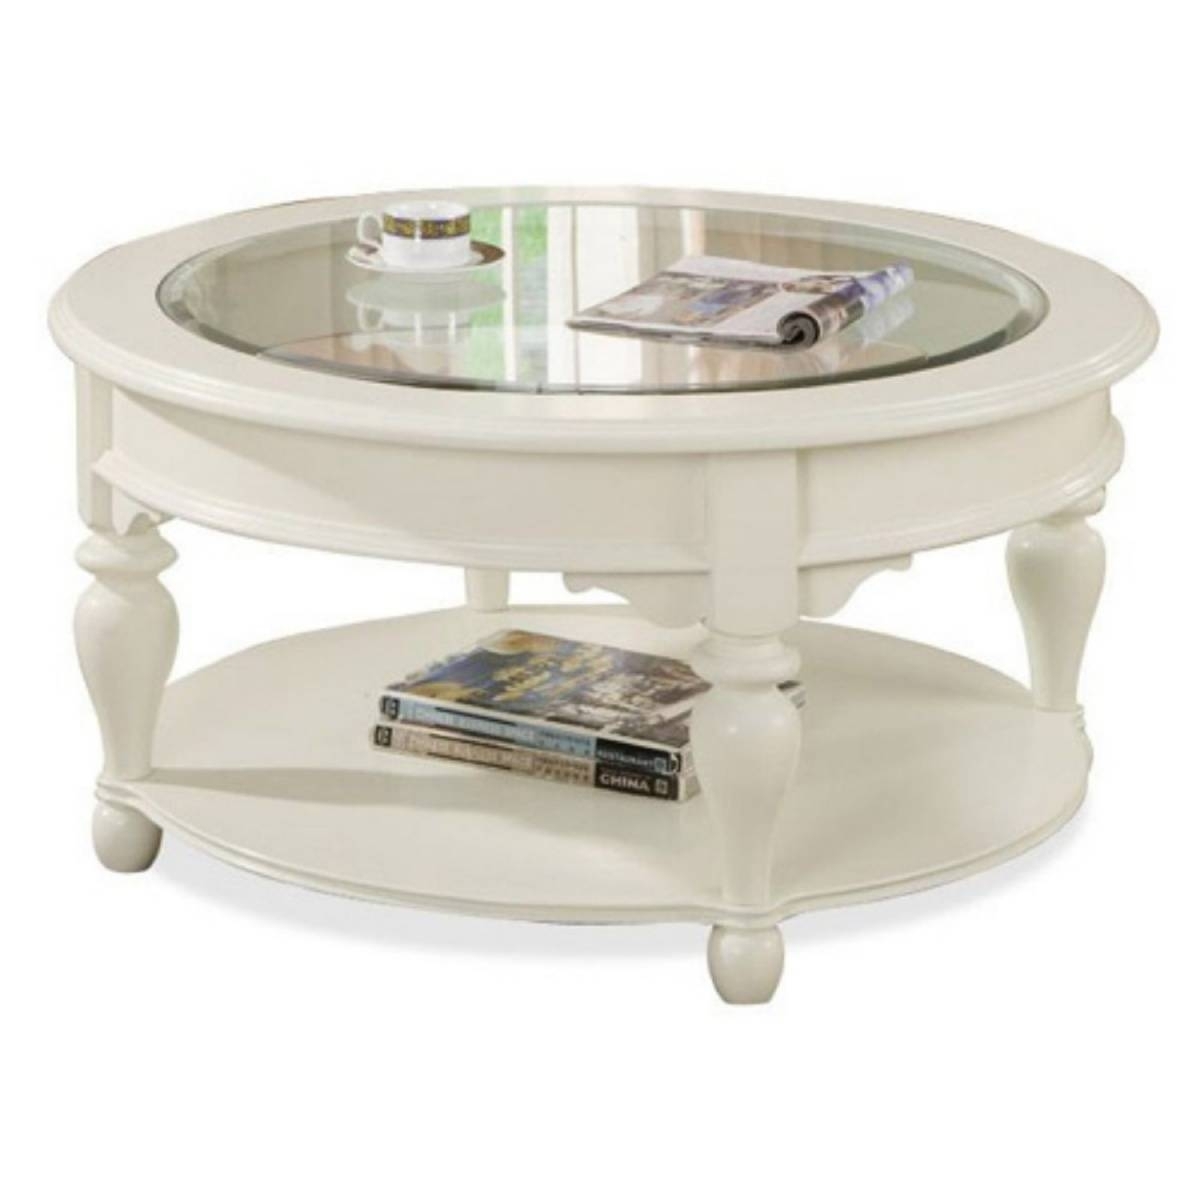 Round wood and glass coffee table 1